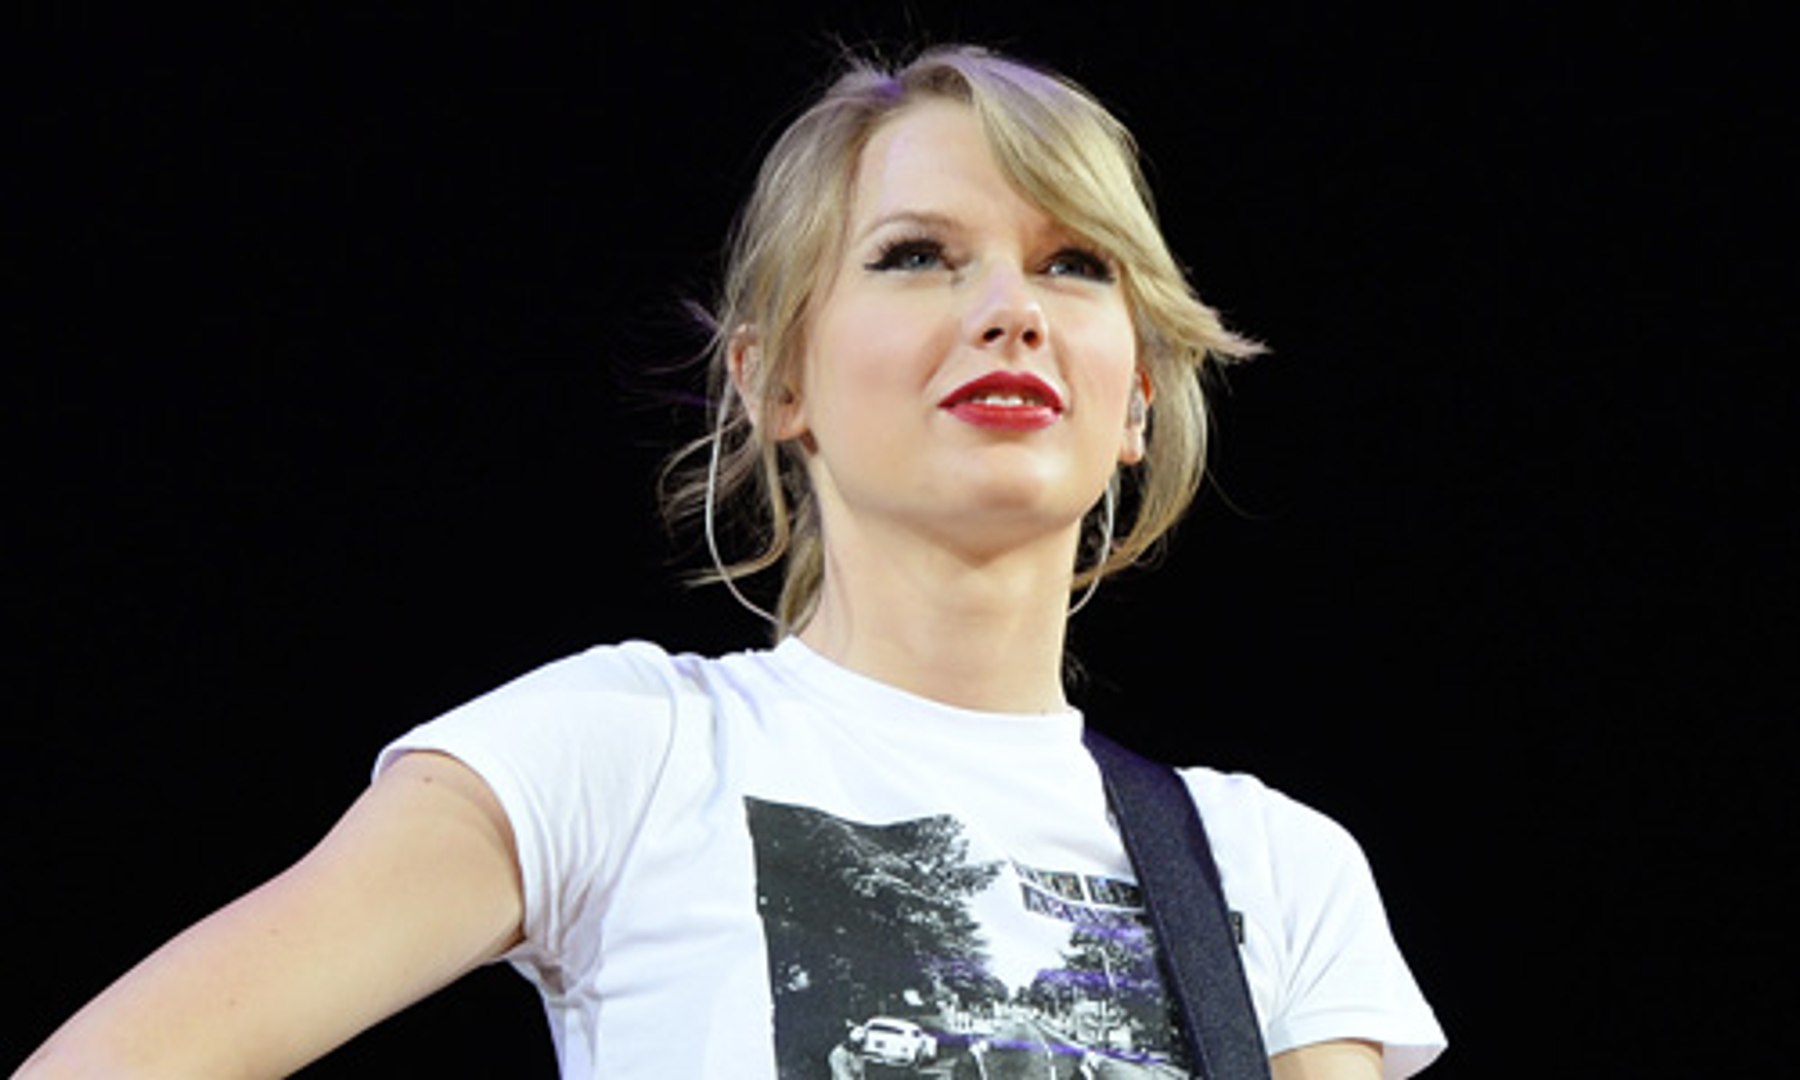 11 Times Taylor Helped Change the World, One Good Deed At a Time